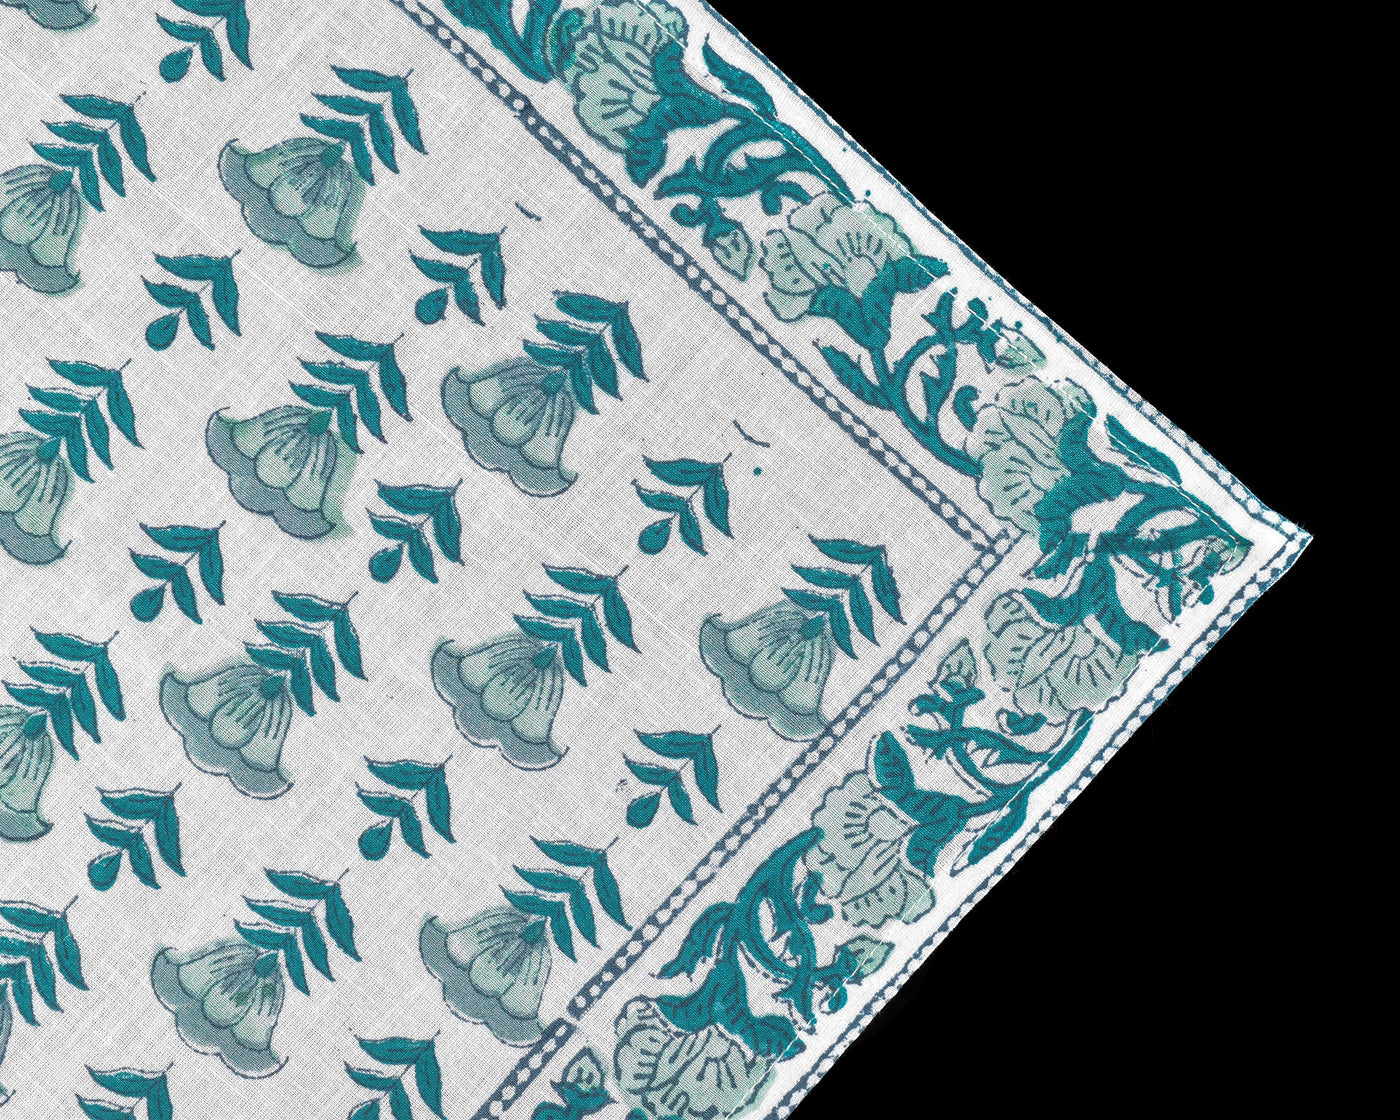 Fabricrush Aquamarine Blue & Turquoise Indian Block Printed 100% Pure Cotton Cloth Napkins 20x20*- Eco Friendly Table Decor, Gift For Her